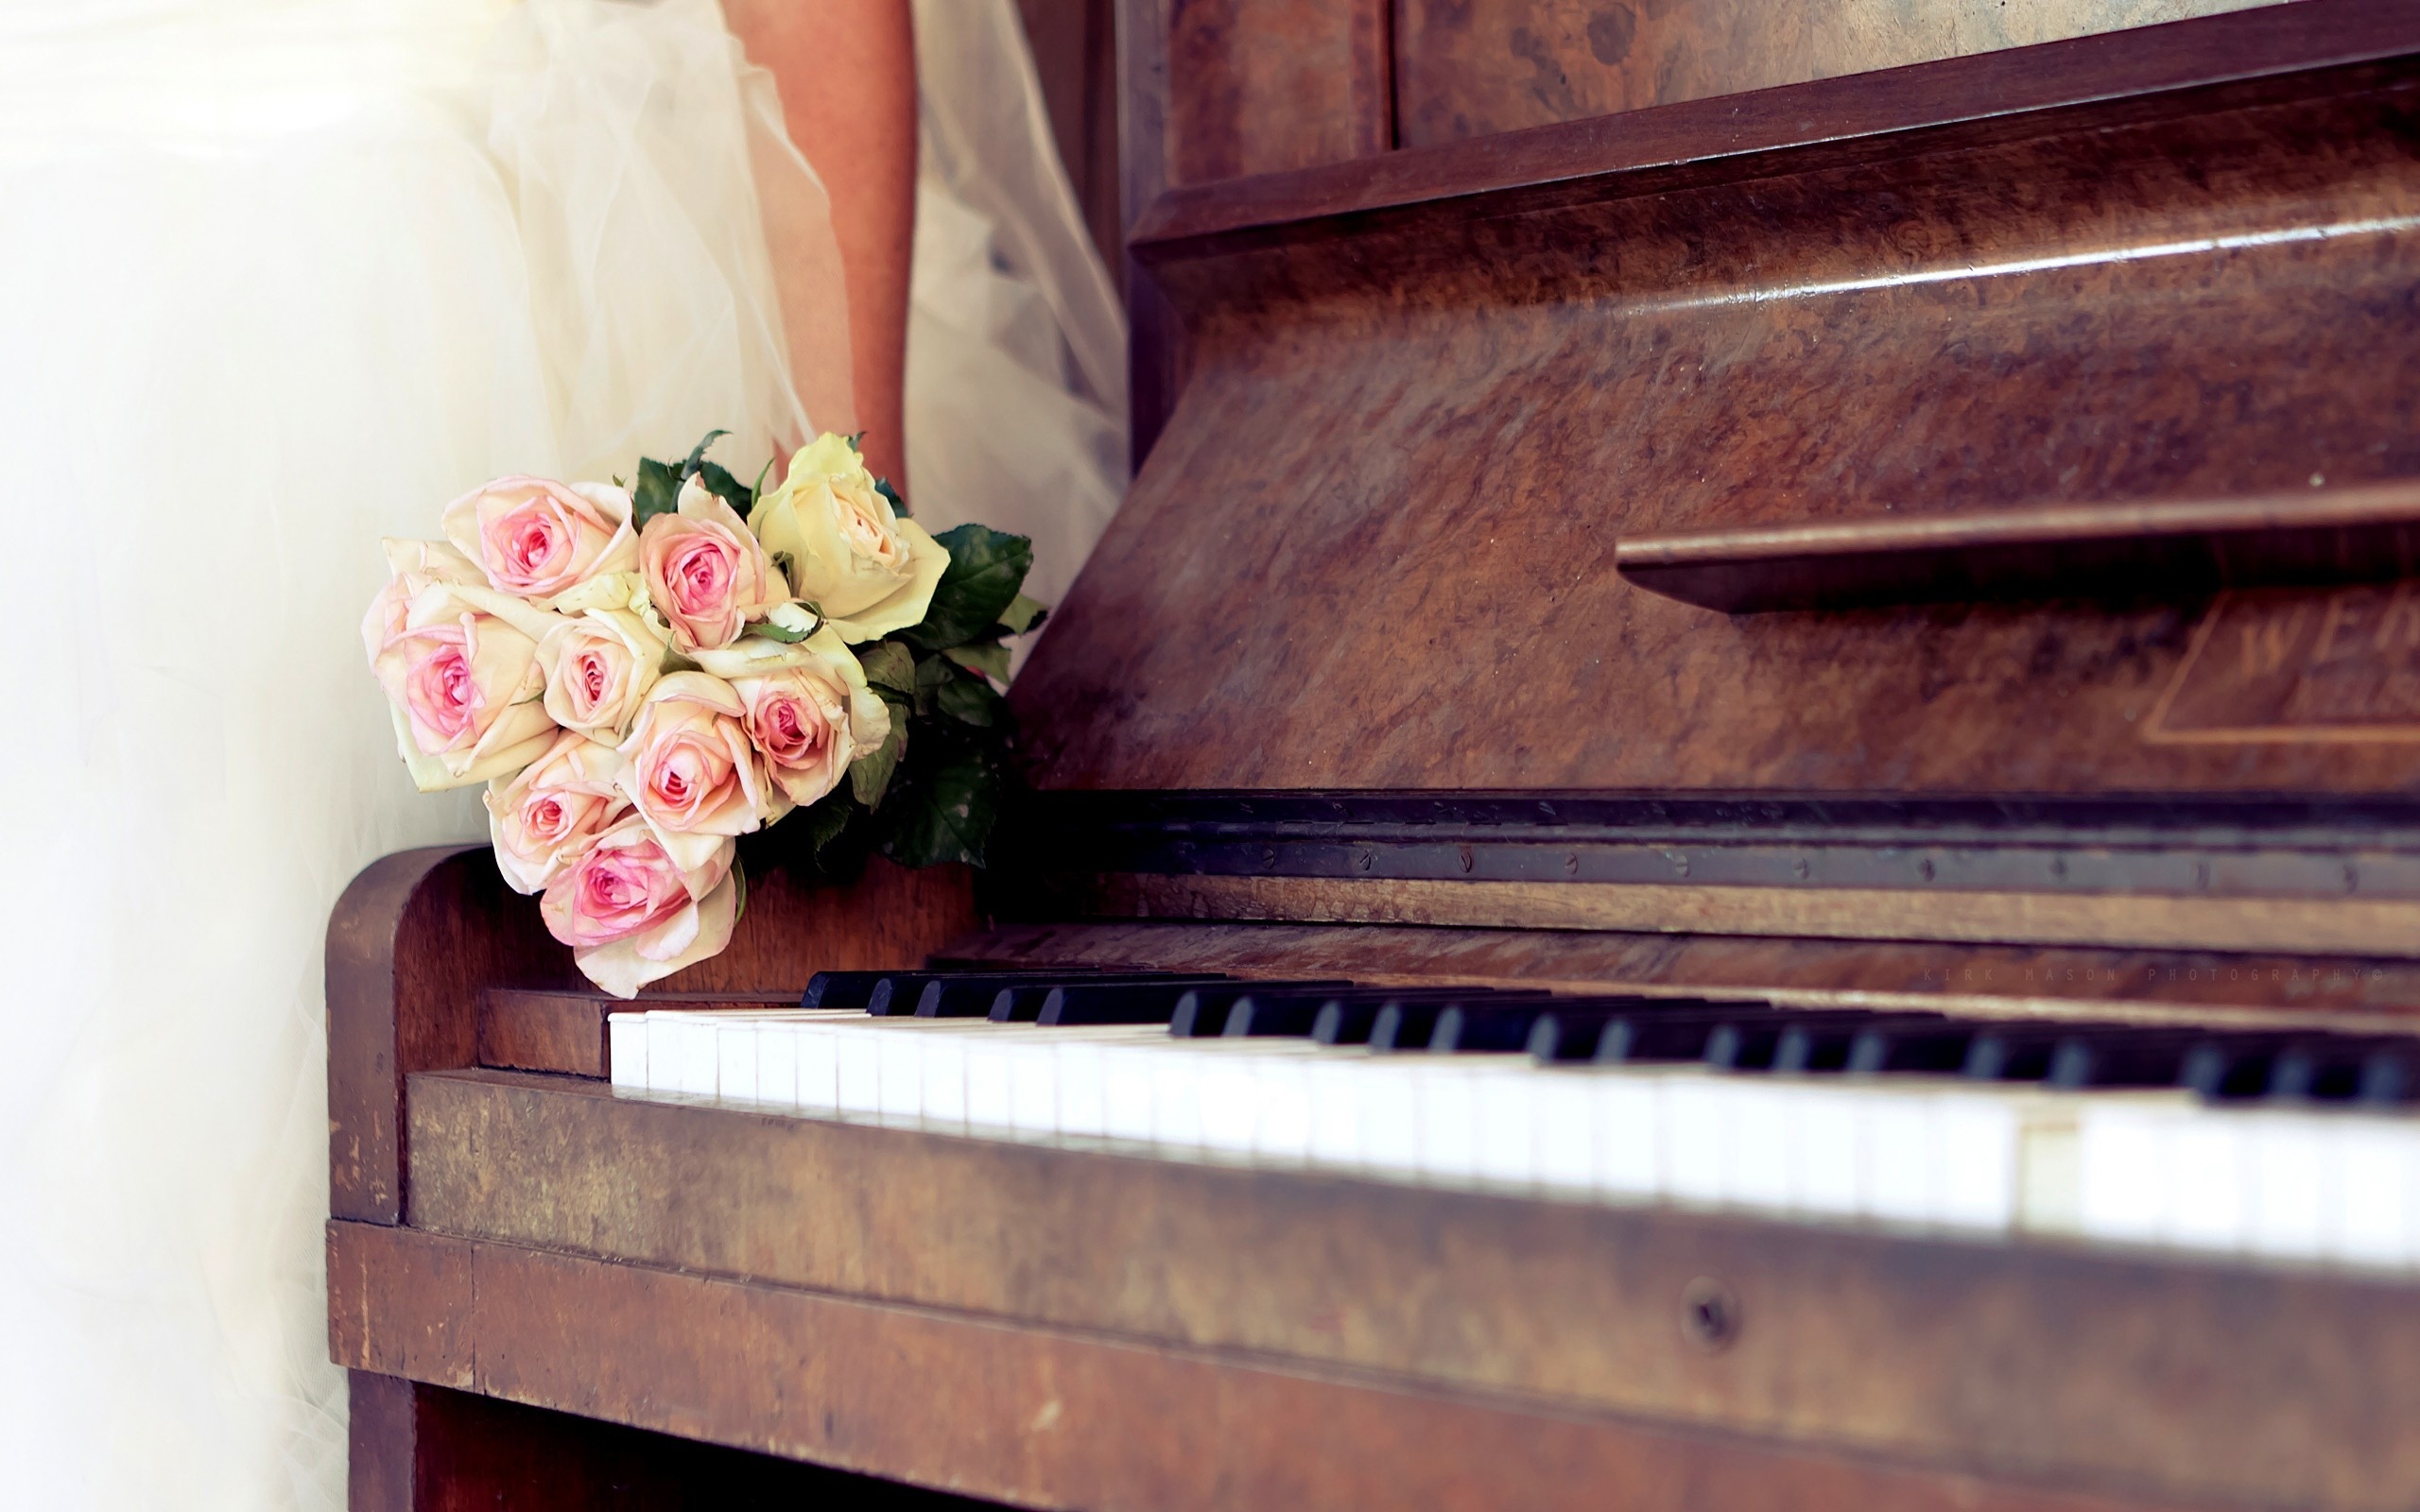 Fortepiano: White Roses, Keyboard Instruments Family, Black And White Keys. 2560x1600 HD Wallpaper.